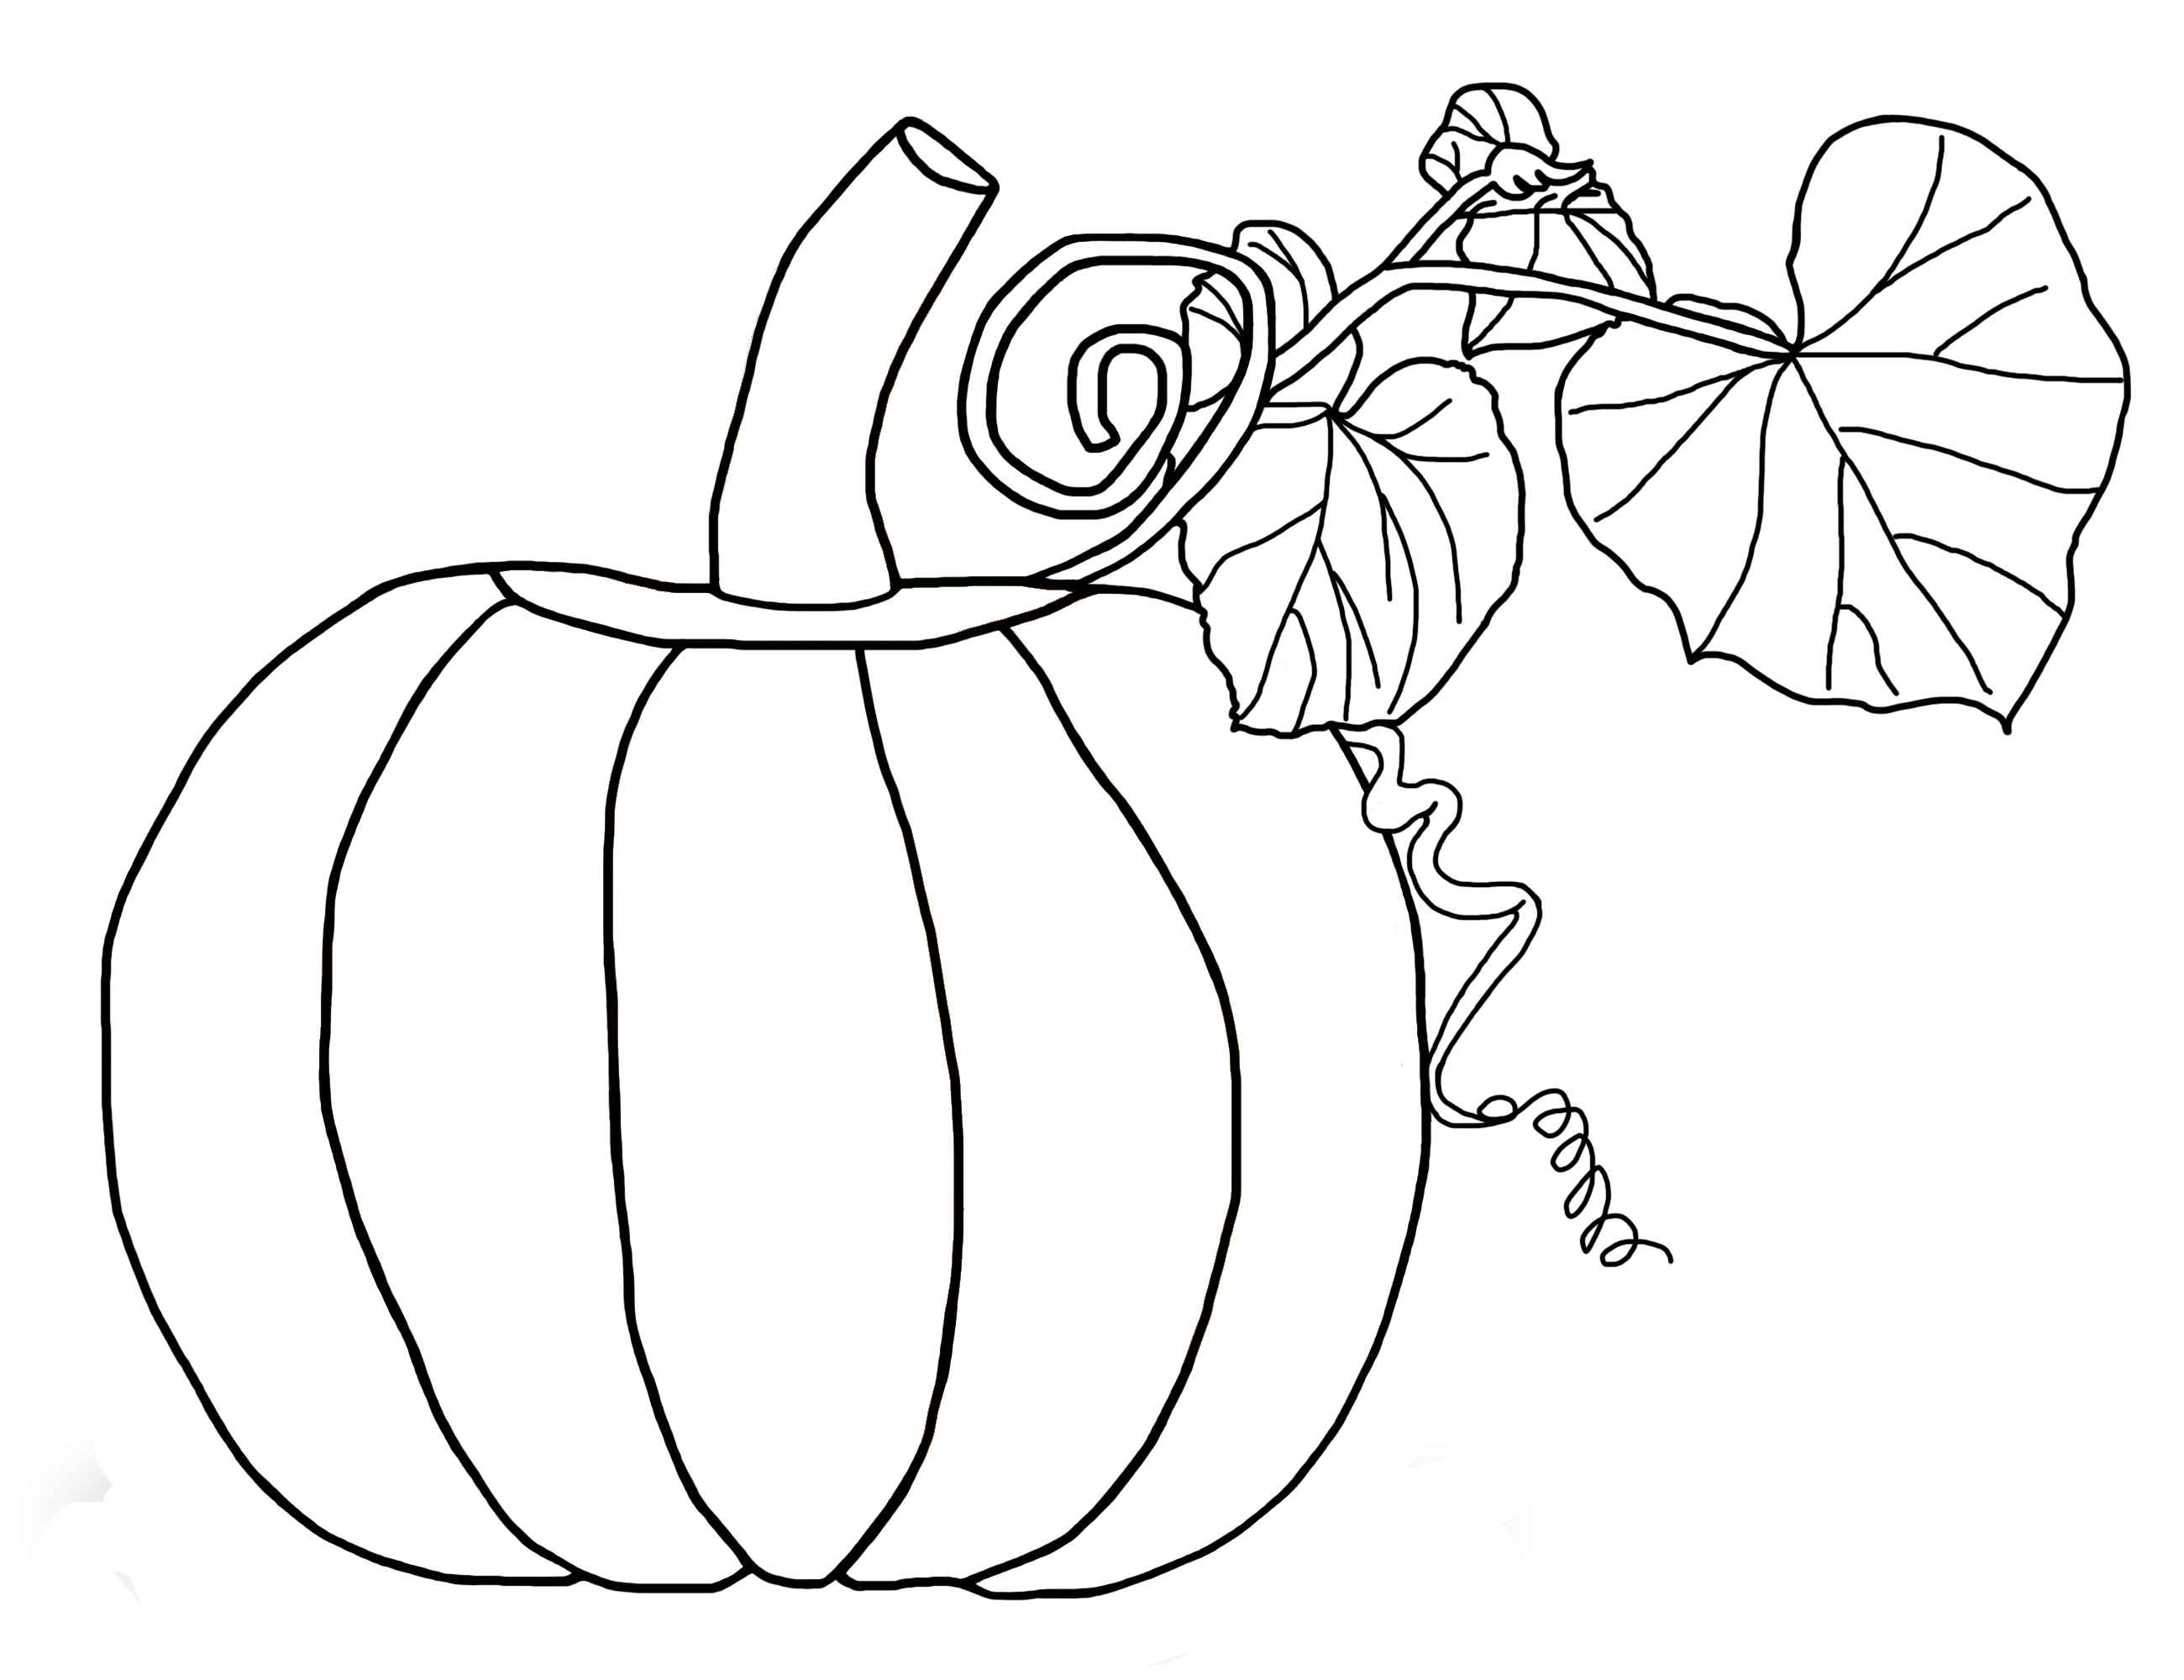 Free Pumpkin Coloring Pages For Kids - Free Printable Pumpkin Coloring Pages